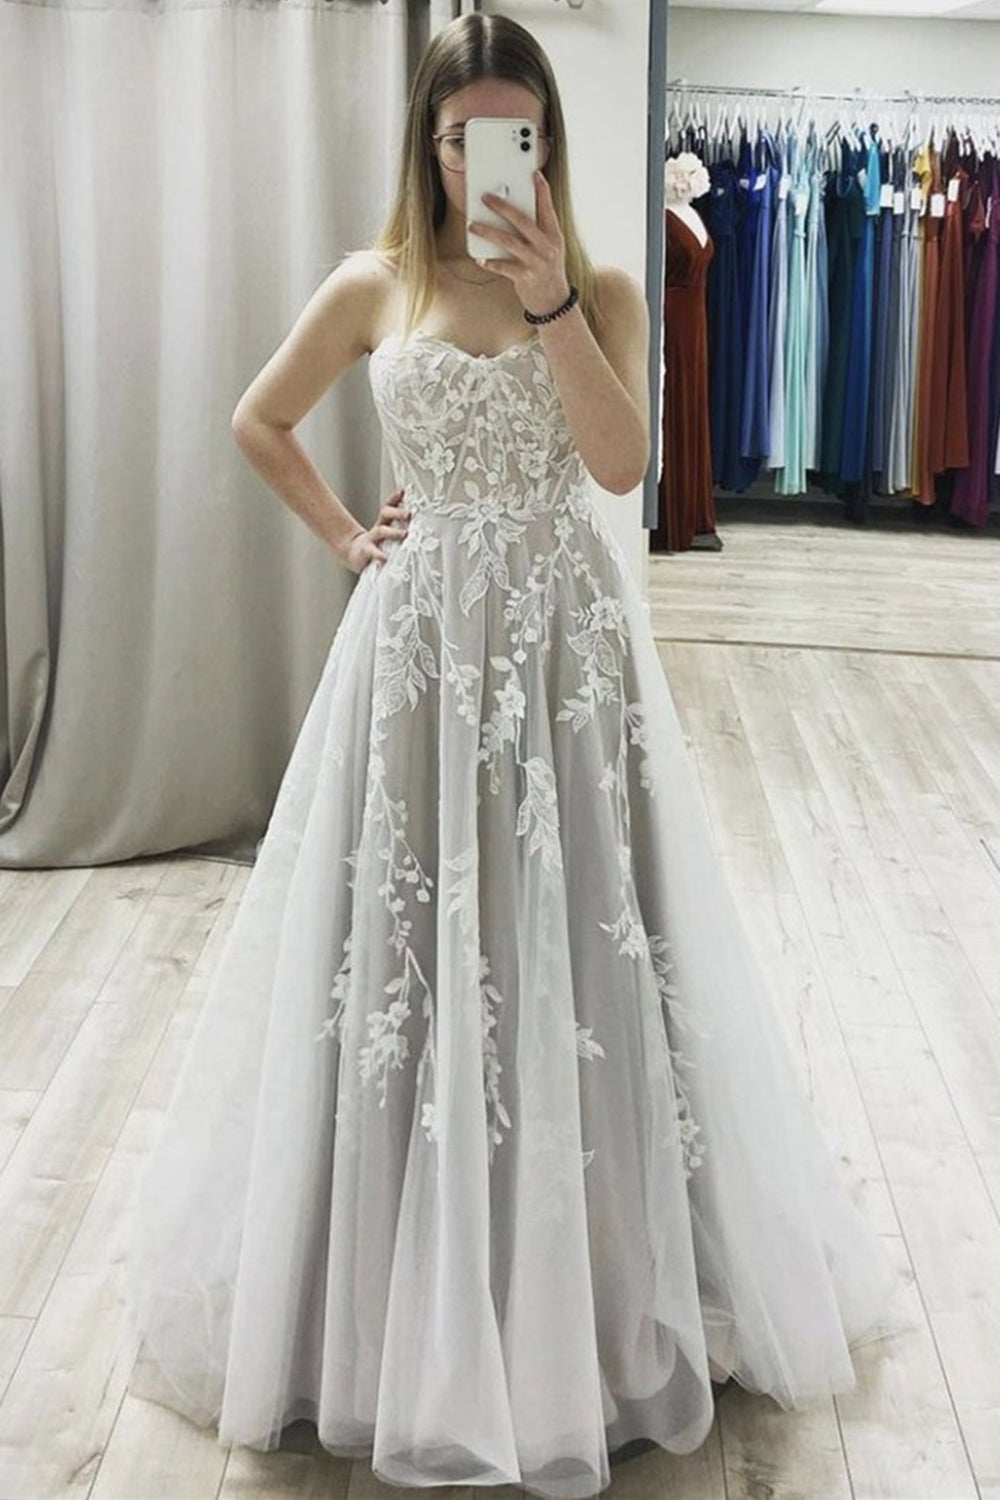 A Line Sweetheart Neck Gray Lace Long Prom Dress, Gray Lace Formal Graduation Evening Dress